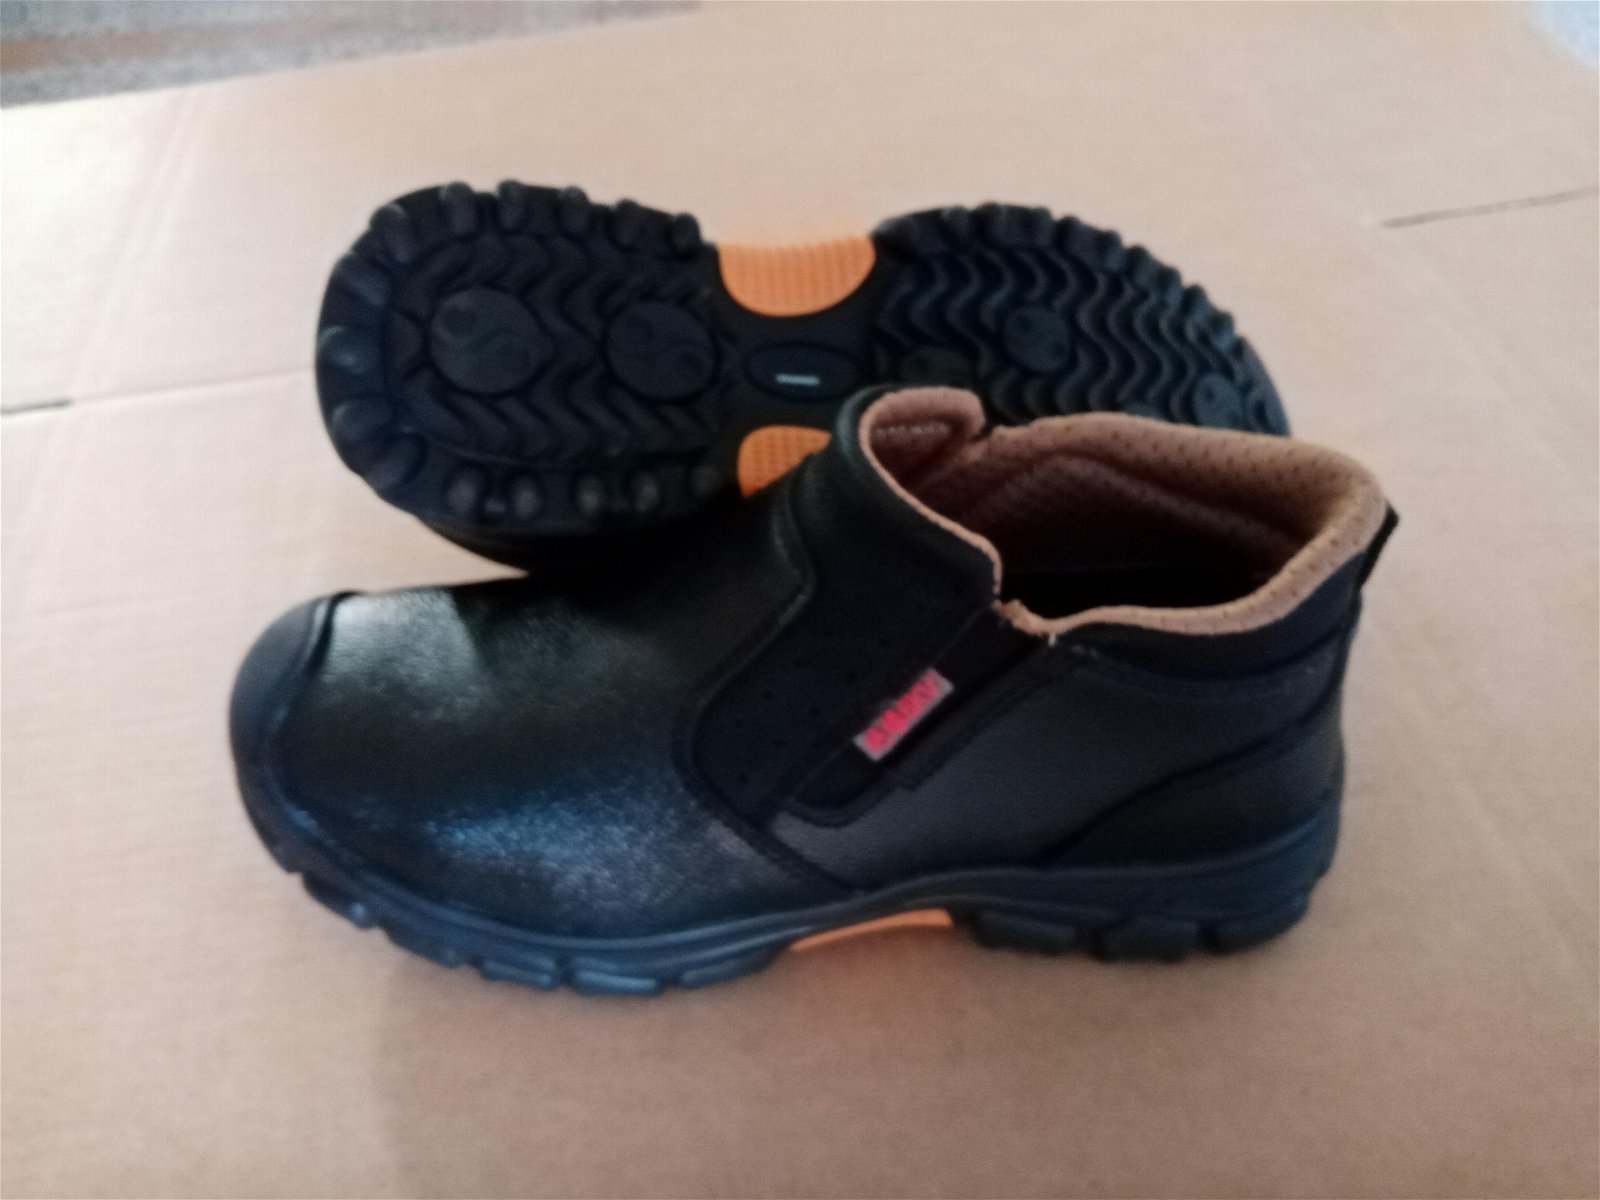 safety shoes 5